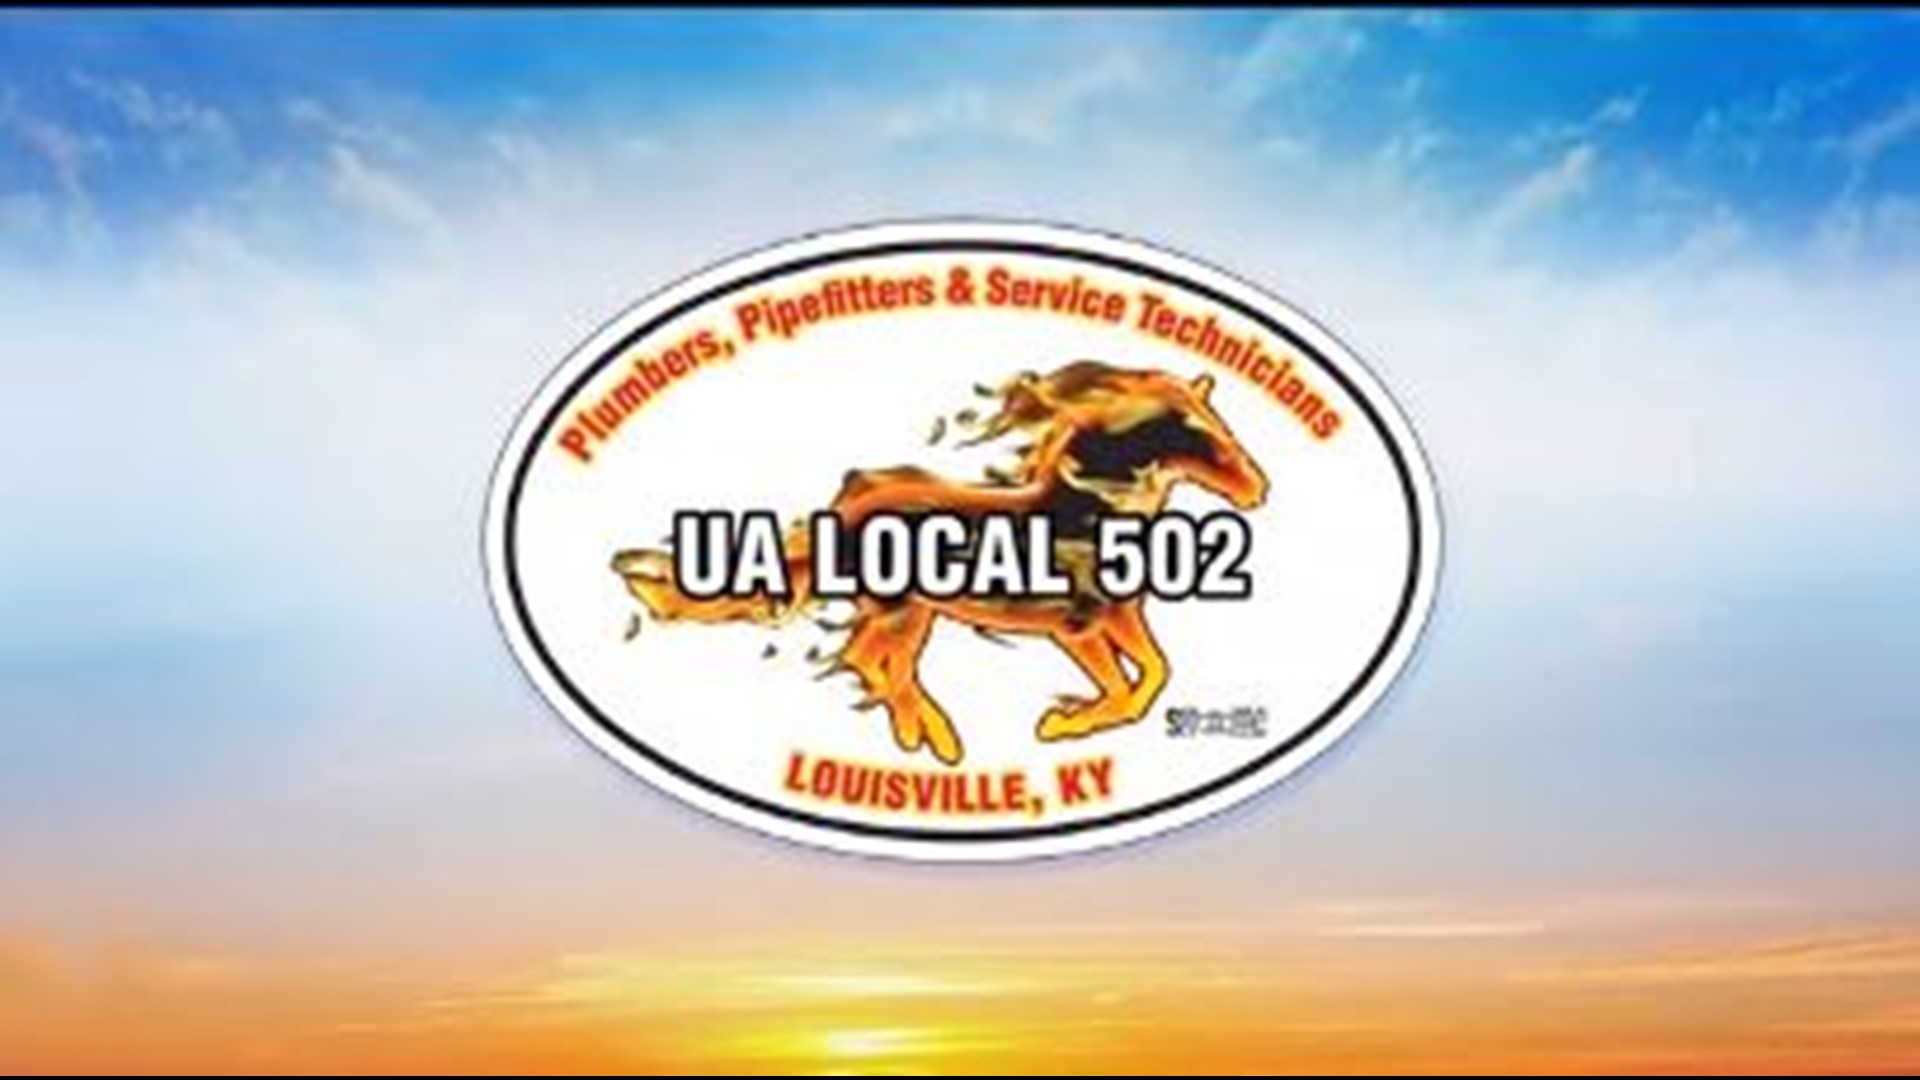 For more information on UA Local 502 Plumbers & Pipefitters, go to Lu502.com